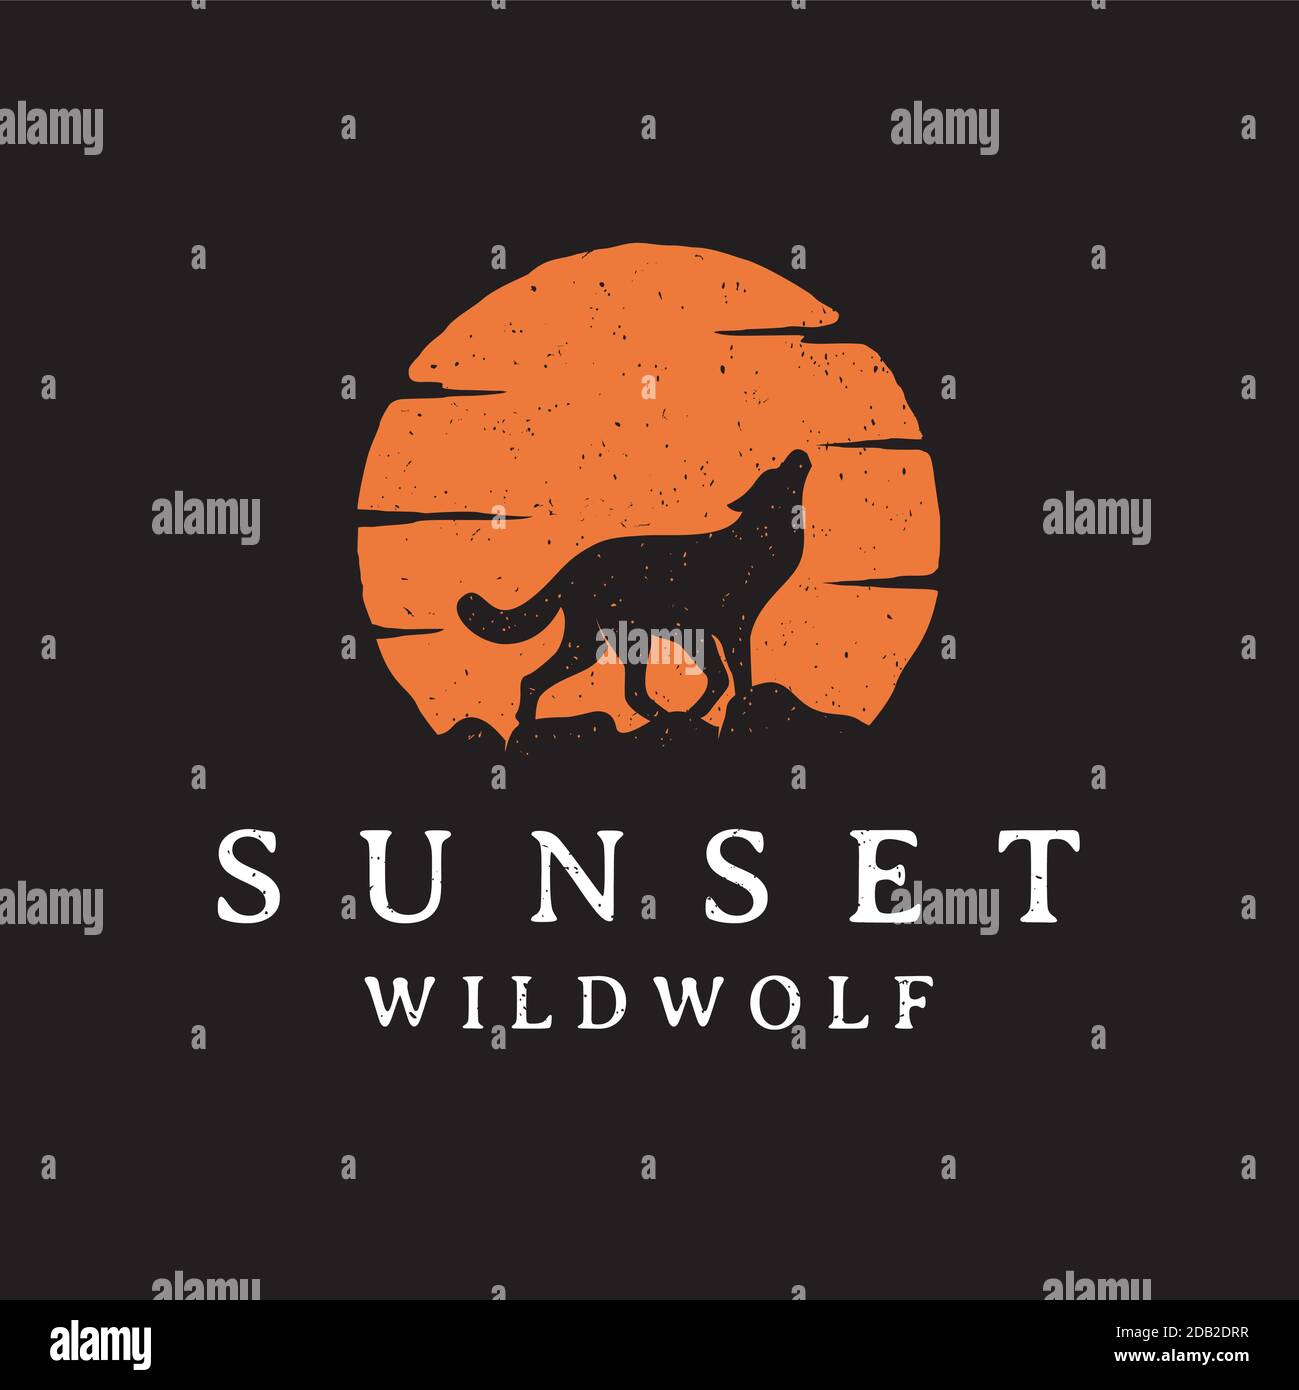 Vintage rustic hipster Howling Wolf Silhouette sunset / sunrise logo design Stock Vector